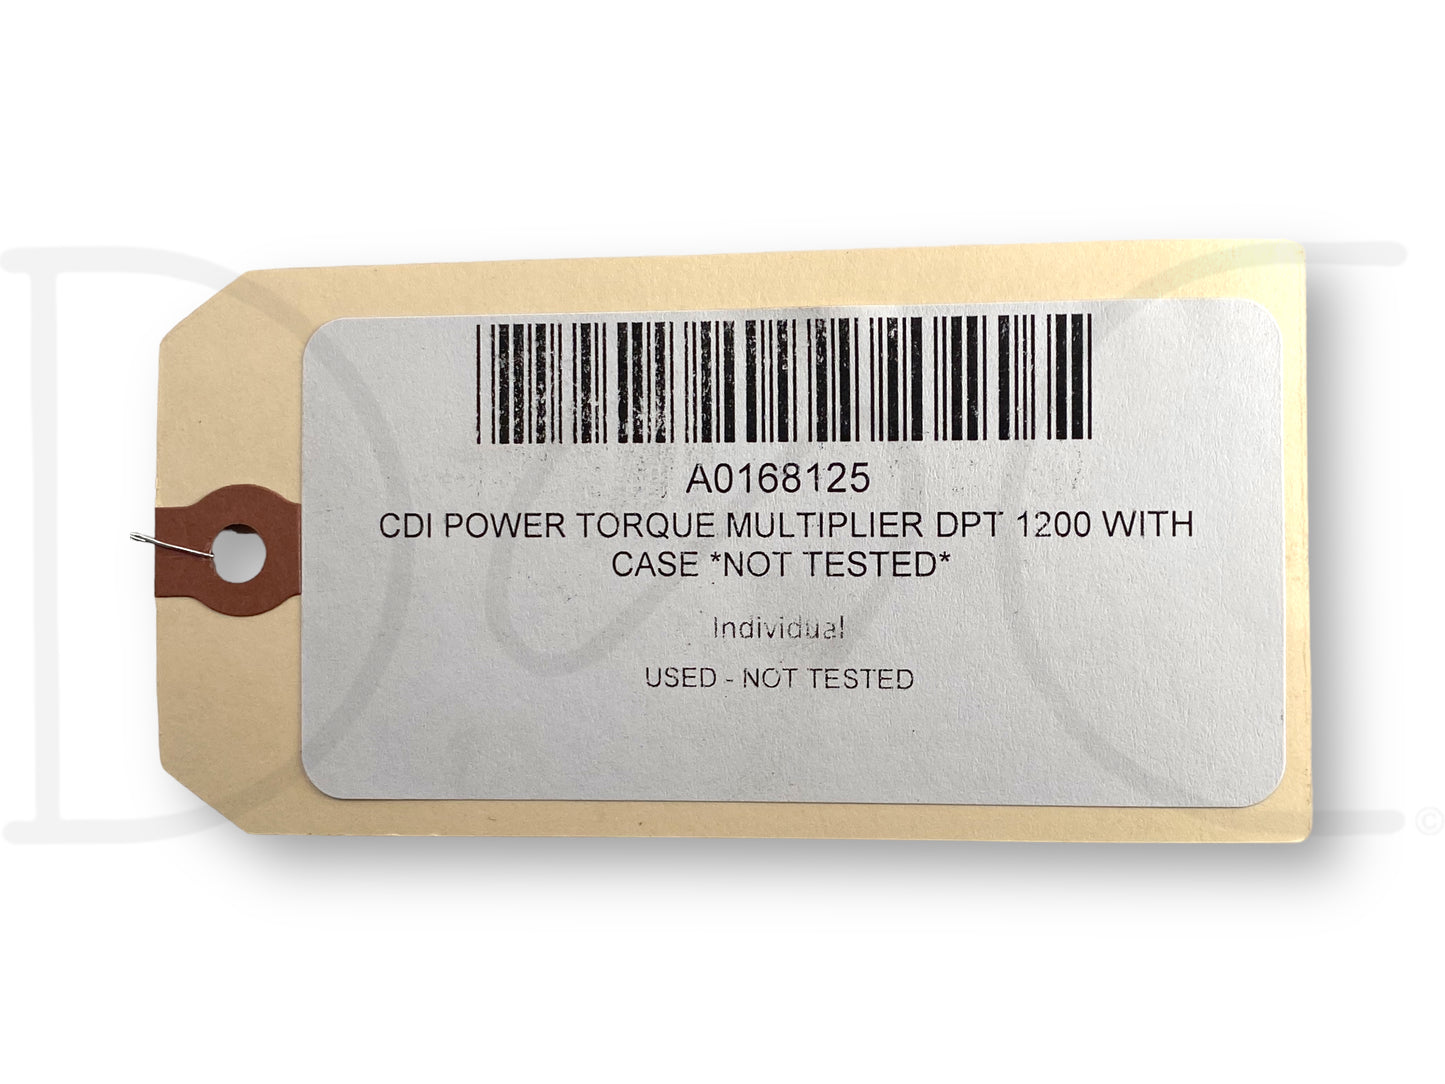 CDi Power Torque Multiplier Dpt 1200 With Case *Not Tested*